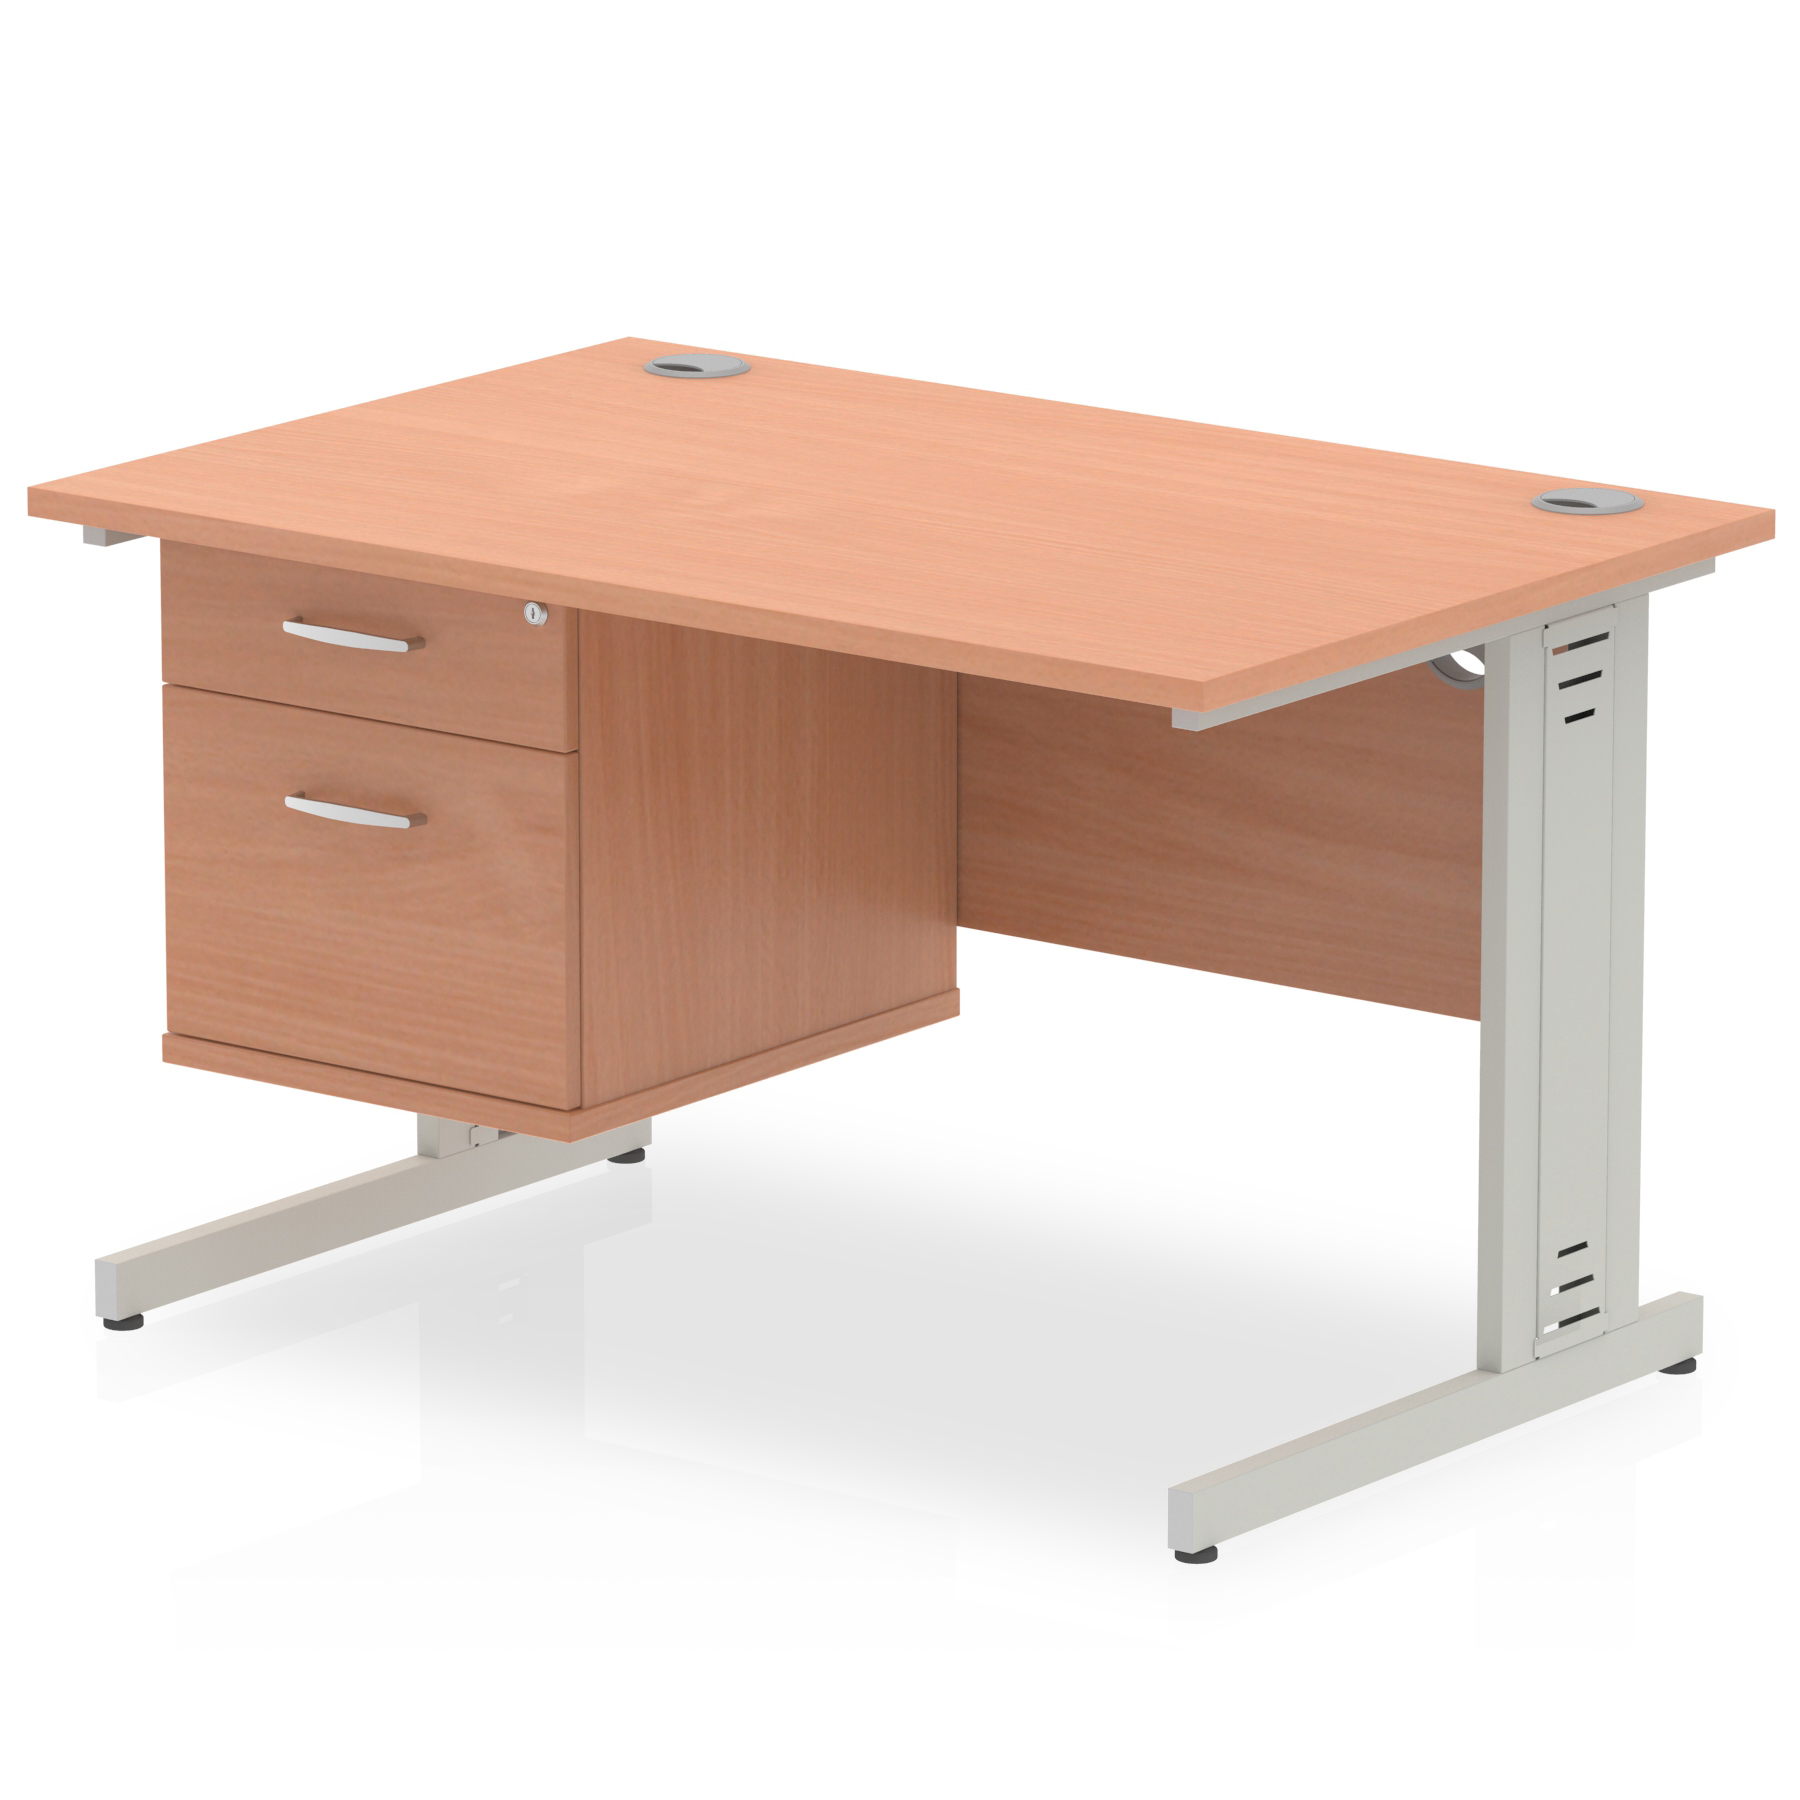 Impulse 1200 x 800mm Straight Desk Beech Top Silver Cable Managed Leg with 1 x 2 Drawer Fixed Pedestal